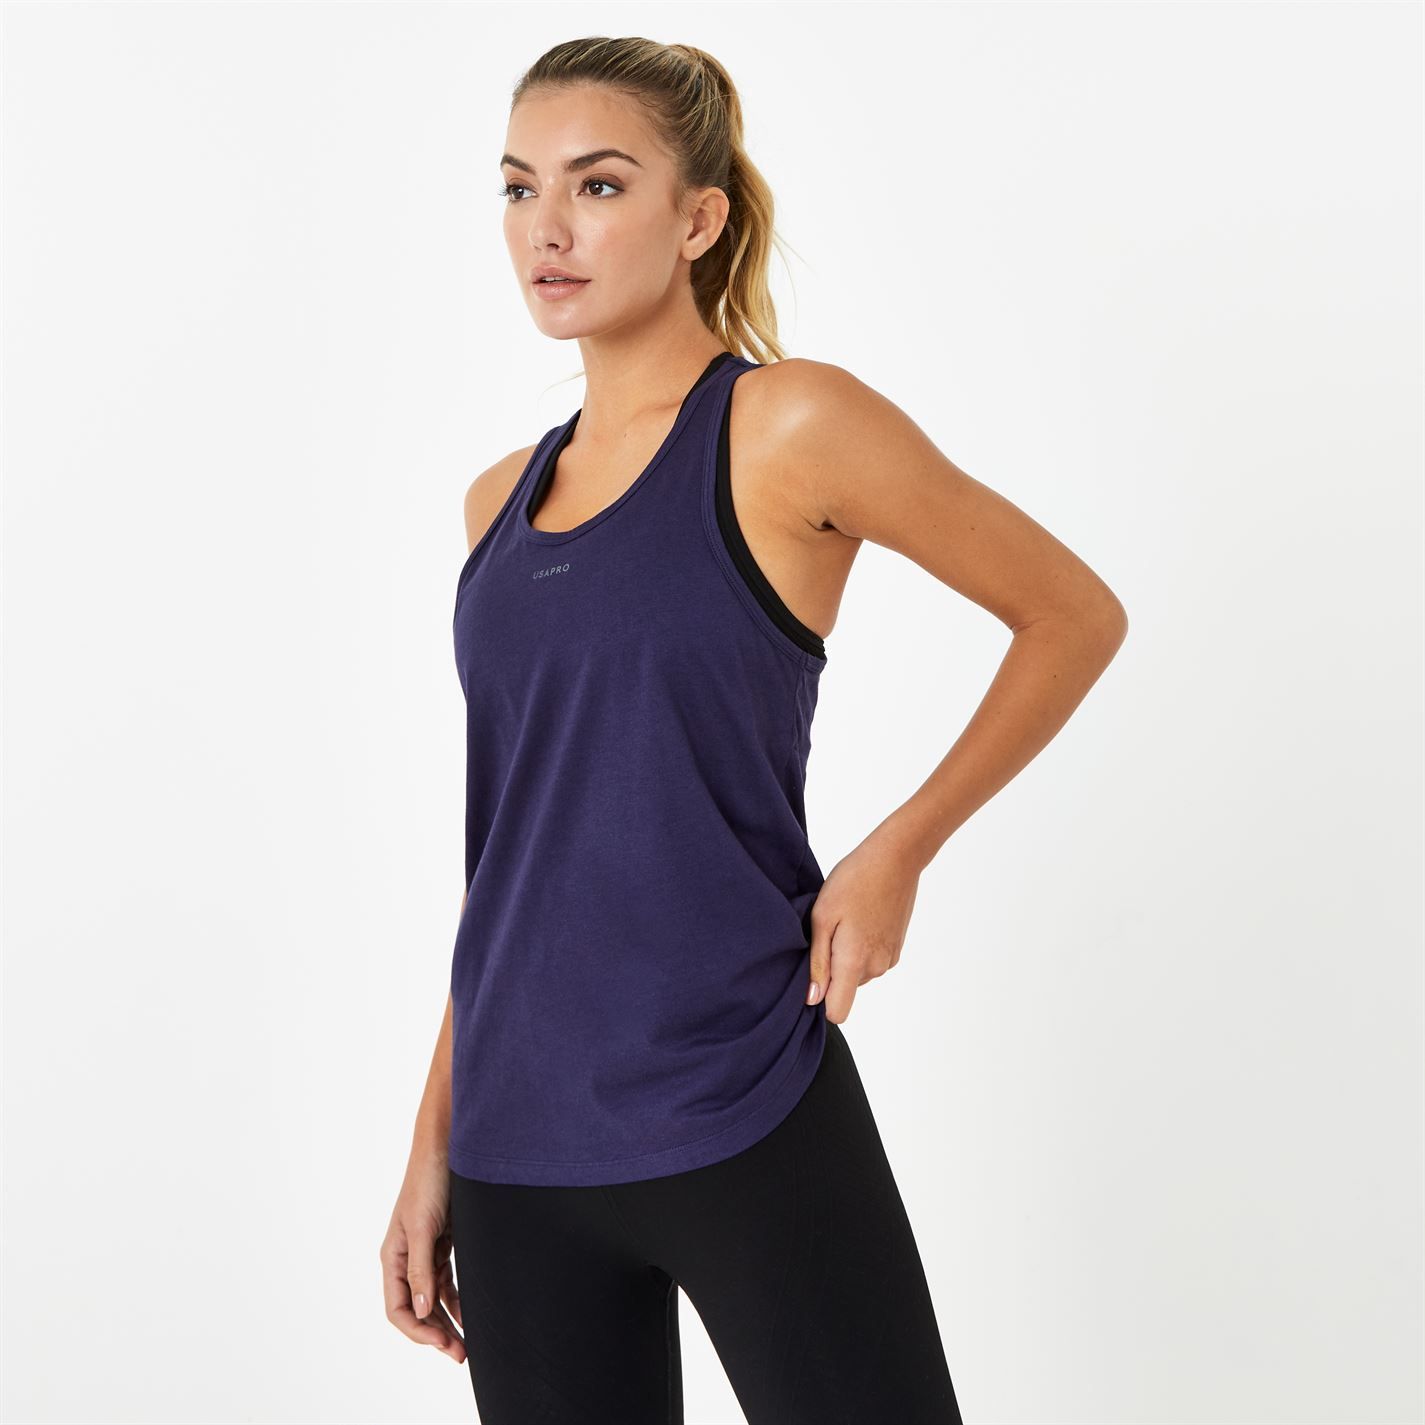 It’s all about investing in workout staples that will see you through any season. Opt for this classic sports tank in a flowy fit for the perfect addition to any sportswear collection. Made with crew neckline and racer back, this sleeveless design will be a game-changer in your next routine. Keep it casual with USA Pro with this lightweight design, creating optimal movement whilst the breathable fabric is constructed soft-touch material for a comfortable and stylish fit.  >Loose fit  >Crew neckline  >Racer back  >Pro-dry fabric  >Sleeveless  >Soft touch  >59% Cotton, 41% Modal  >Machine washable